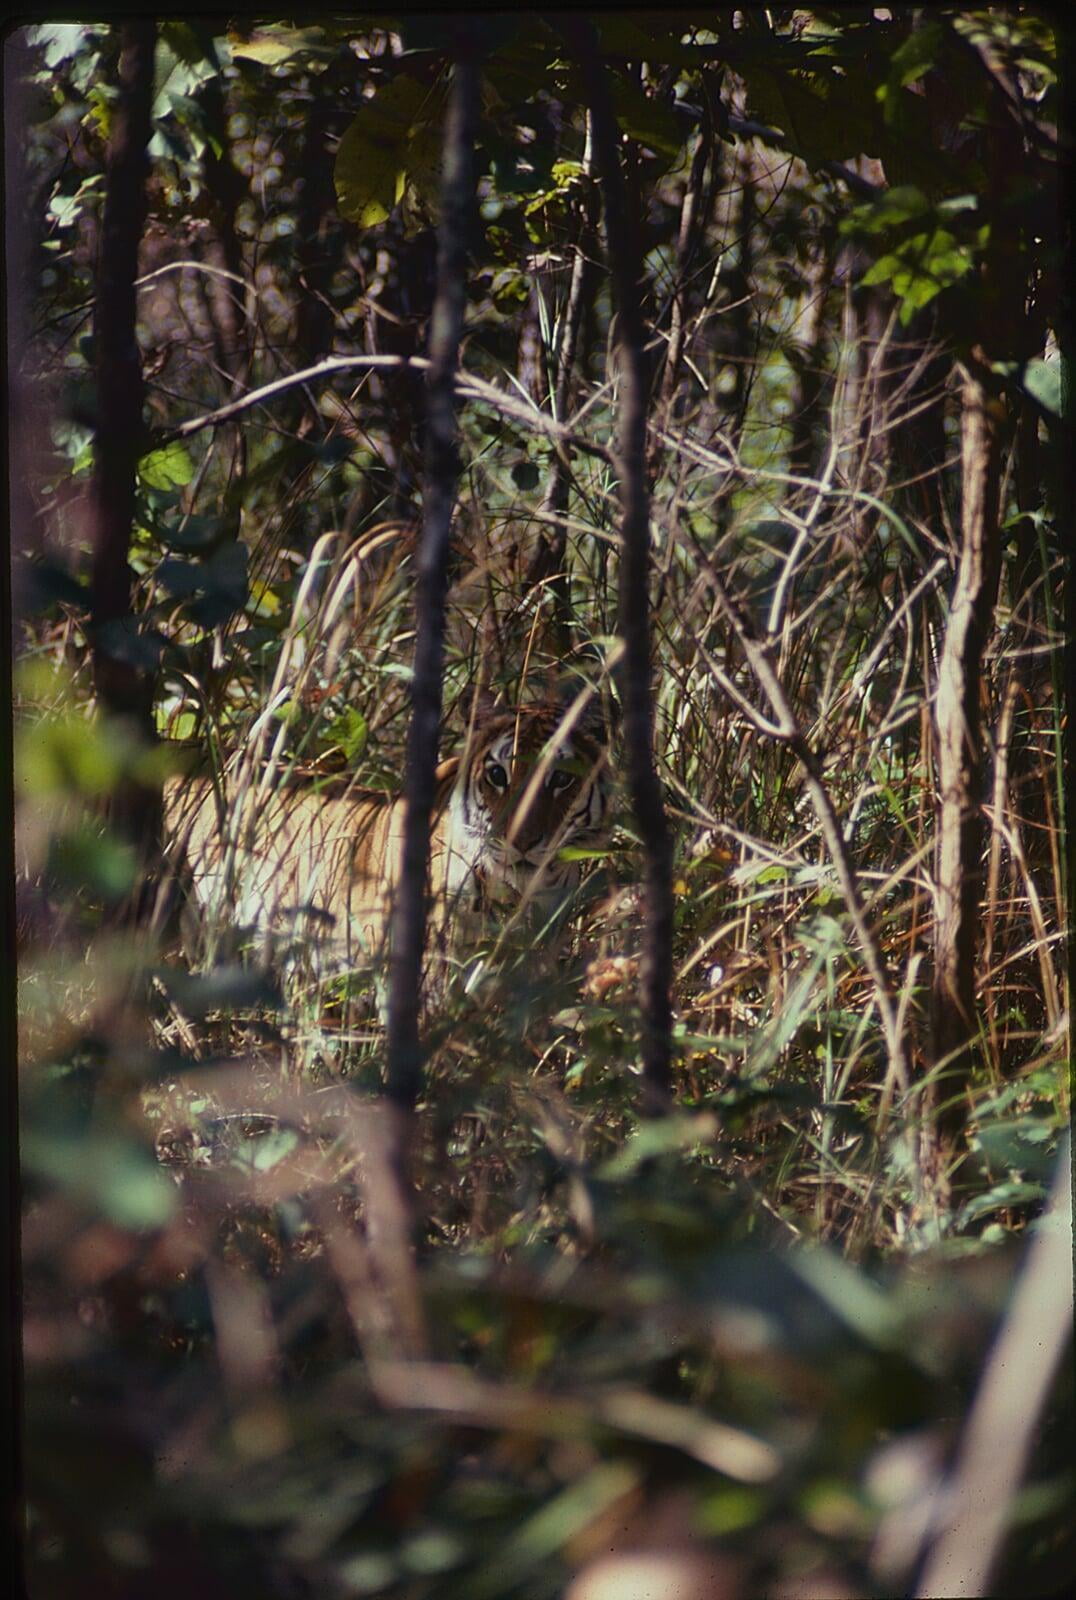 Tiger hiding in forest, visible through branches